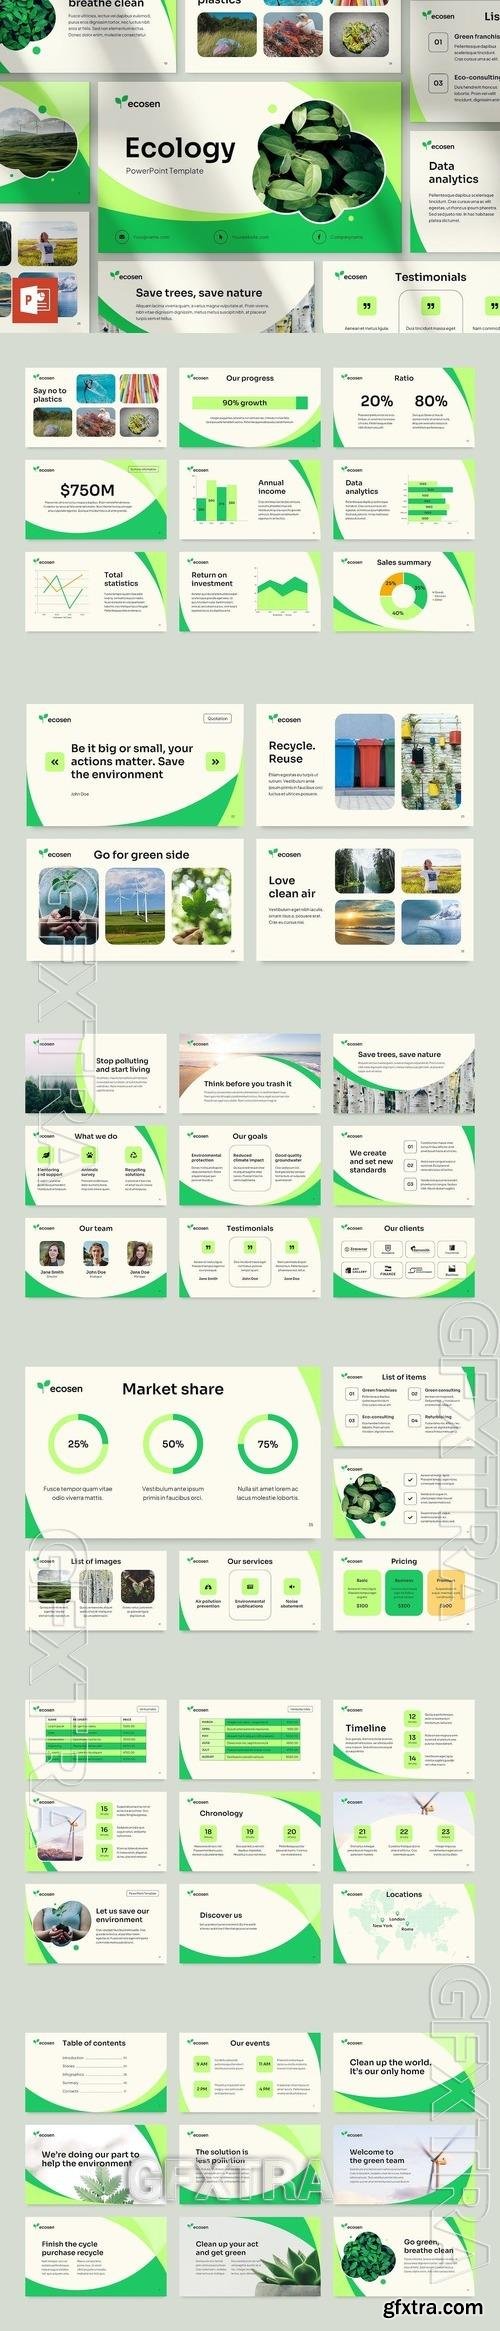 Ecology PowerPoint Template KW8MBJL